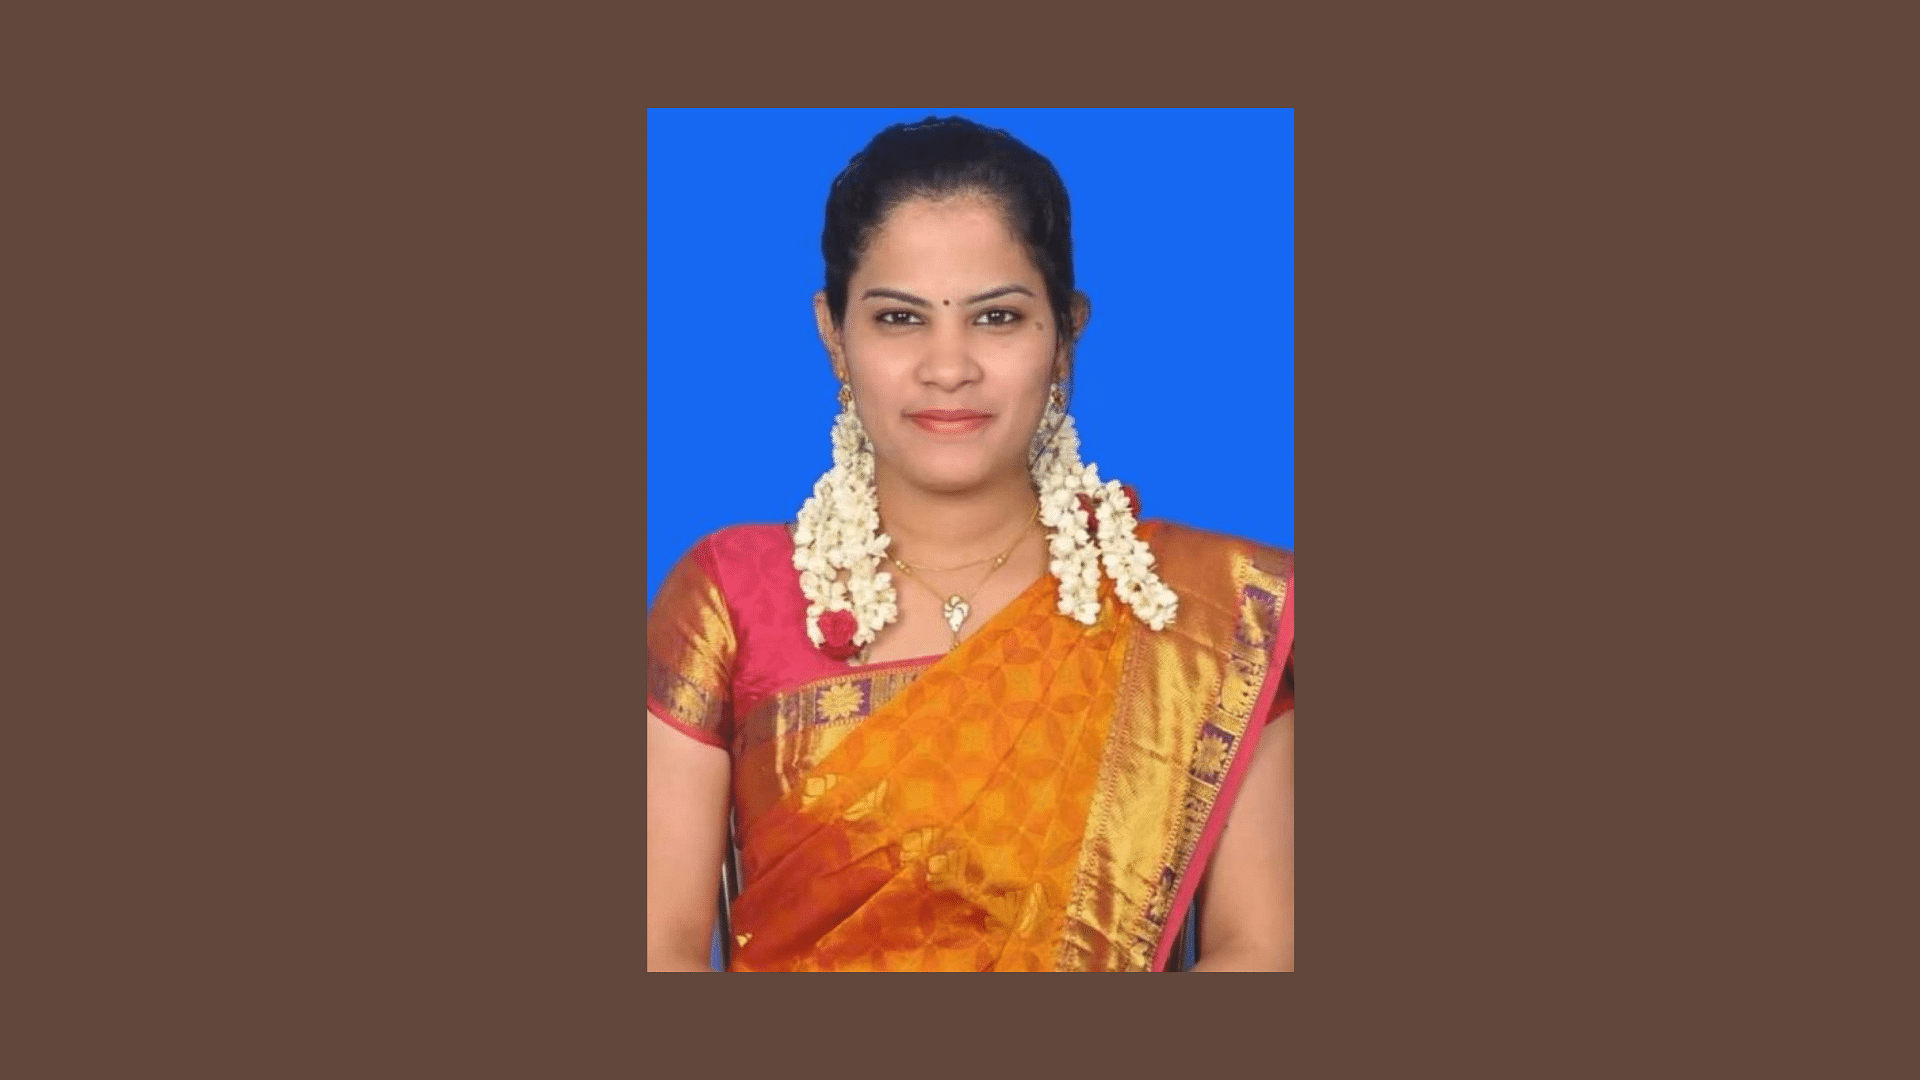 <div class="paragraphs"><p>R Priya of the Dravida Munnetra Kazhagam (DMK) is all set to become the youngest and first Dalit woman Mayor of Chennai, the party that swept the recently concluded local body polls in Tamil Nadu and won a majority of seats in the Chennai Corporation, announced on Thursday, 3 March.</p></div>